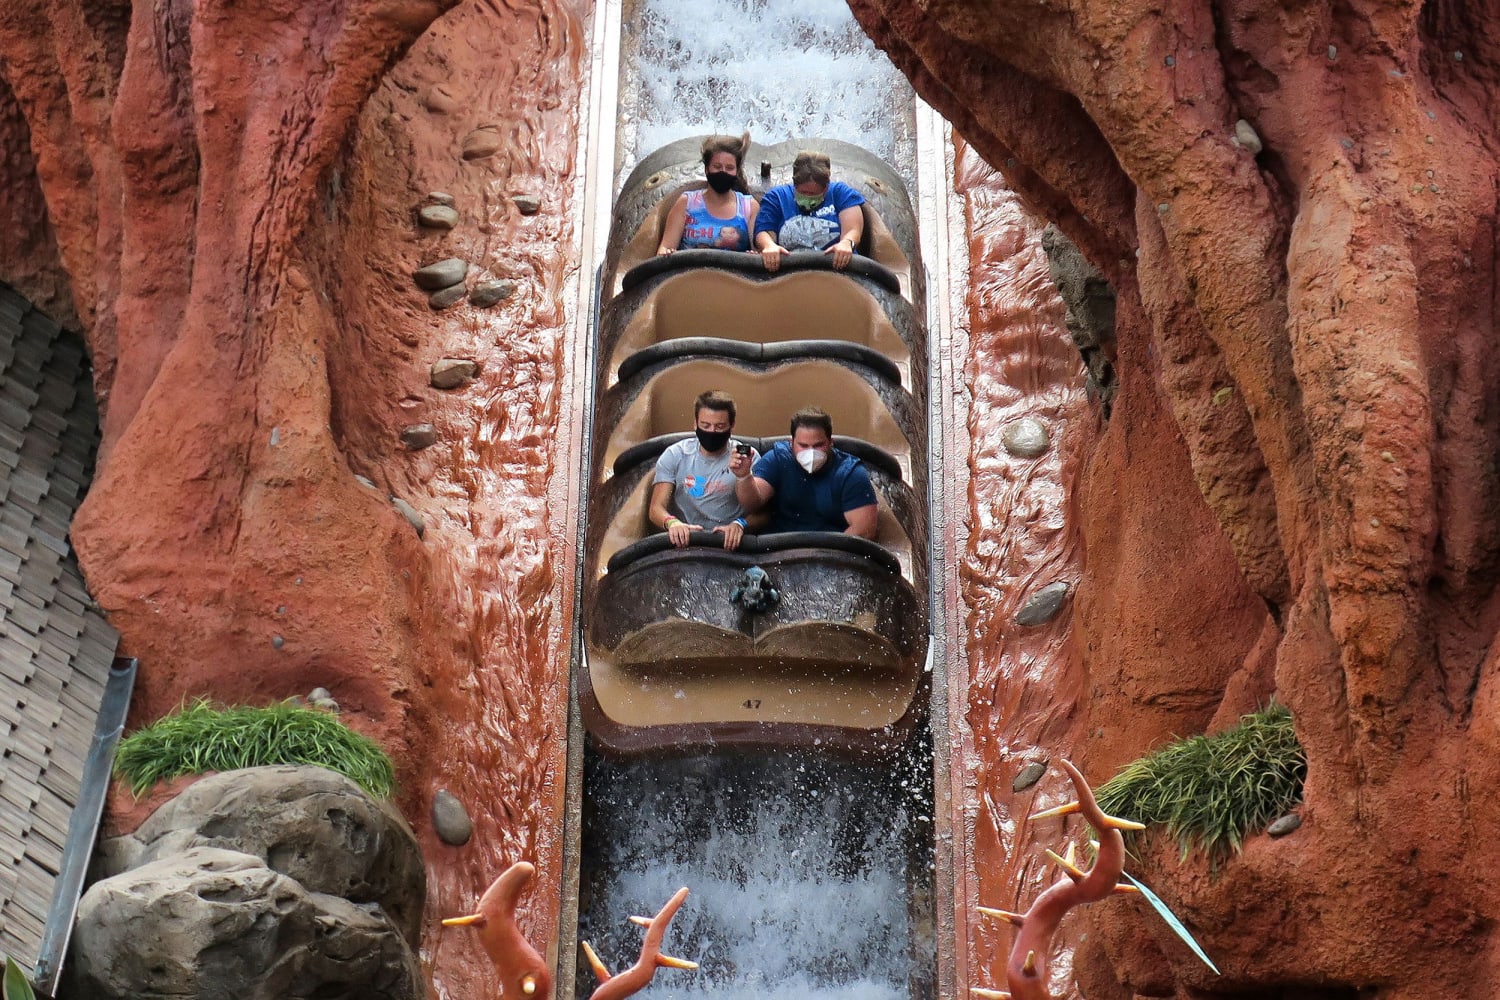 Disney closes Splash Mountain at Disney World, while people try to sell